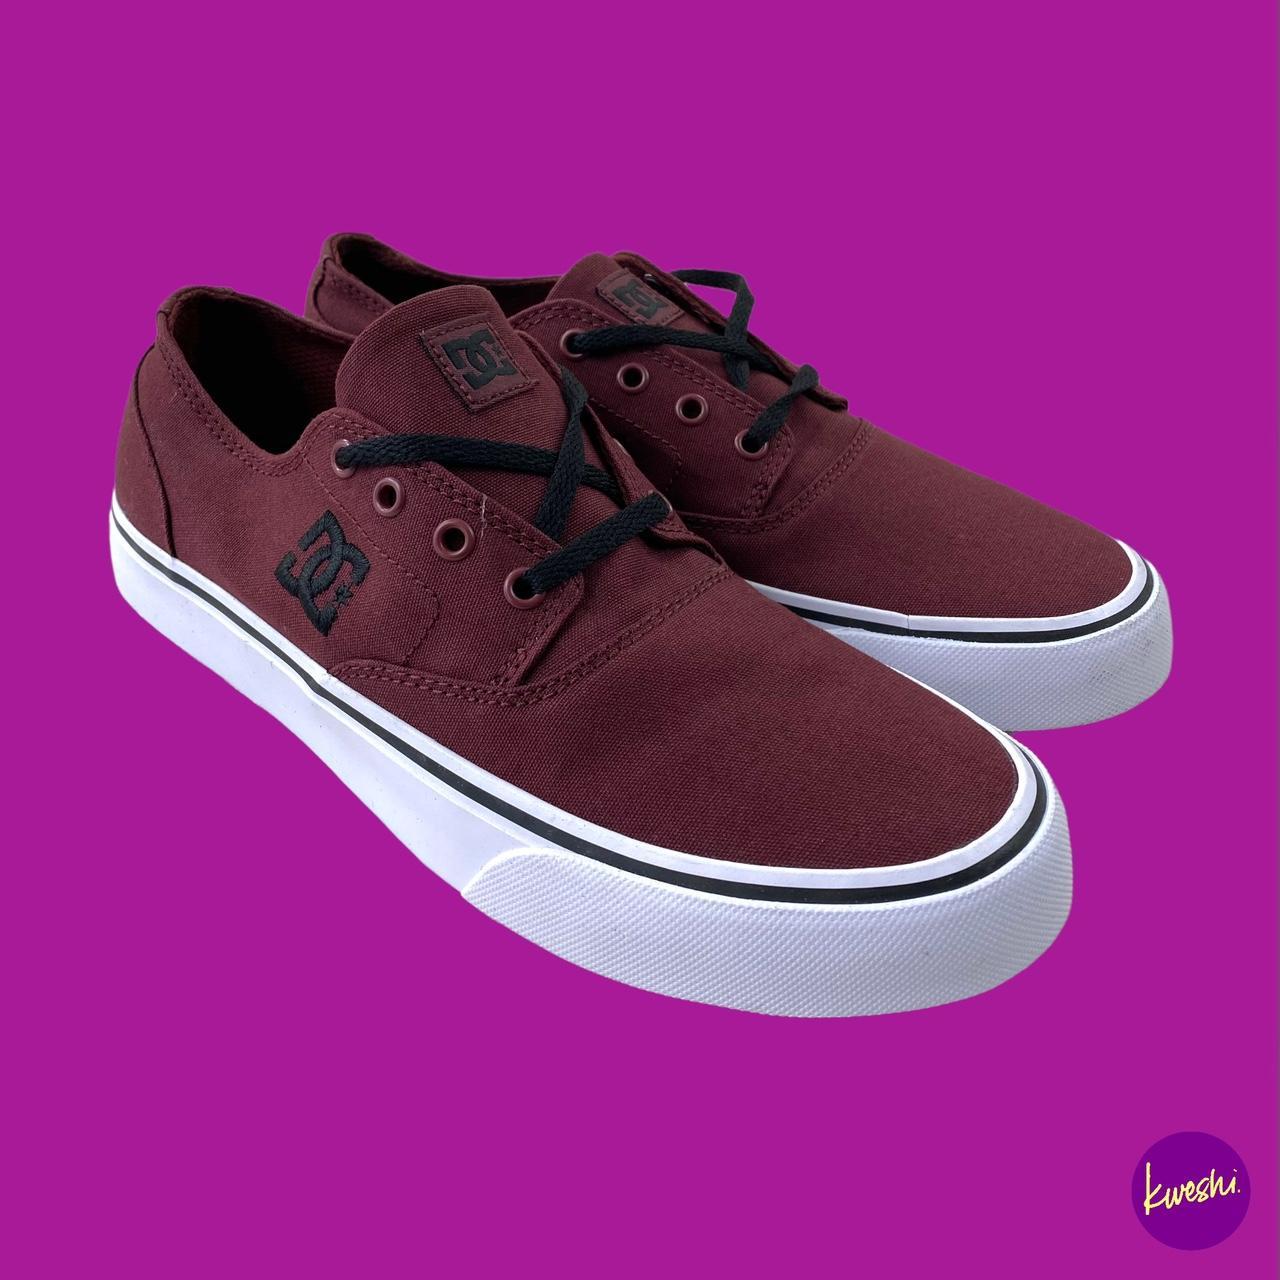 DC Shoes Men's Burgundy and White Trainers | Depop